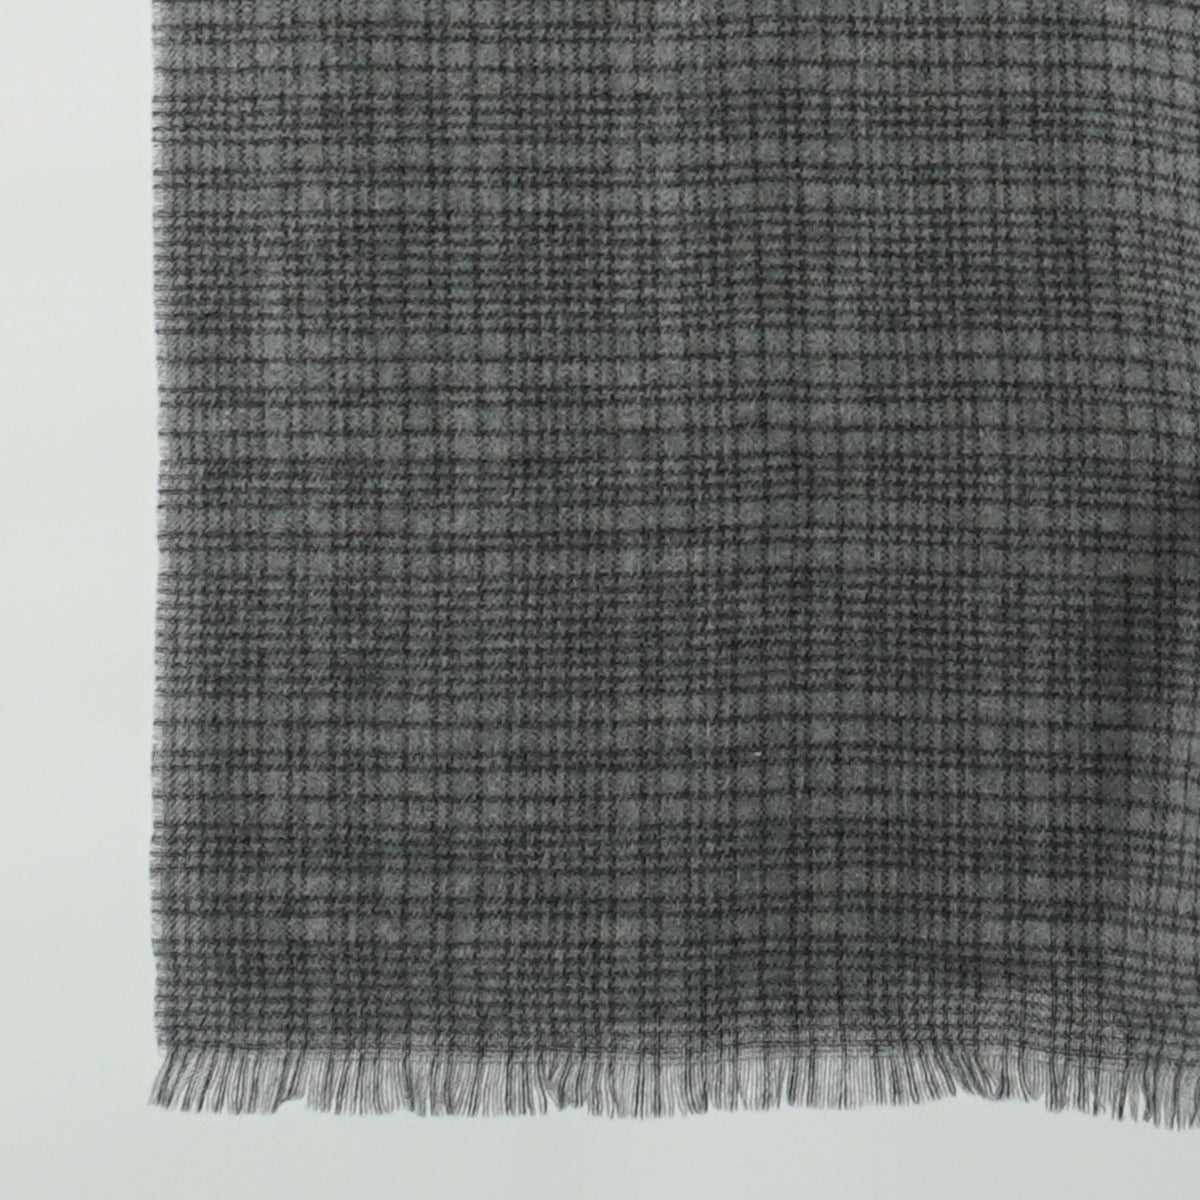 Fraas Pure Cashmere Scarf in Grey/Black Tartan